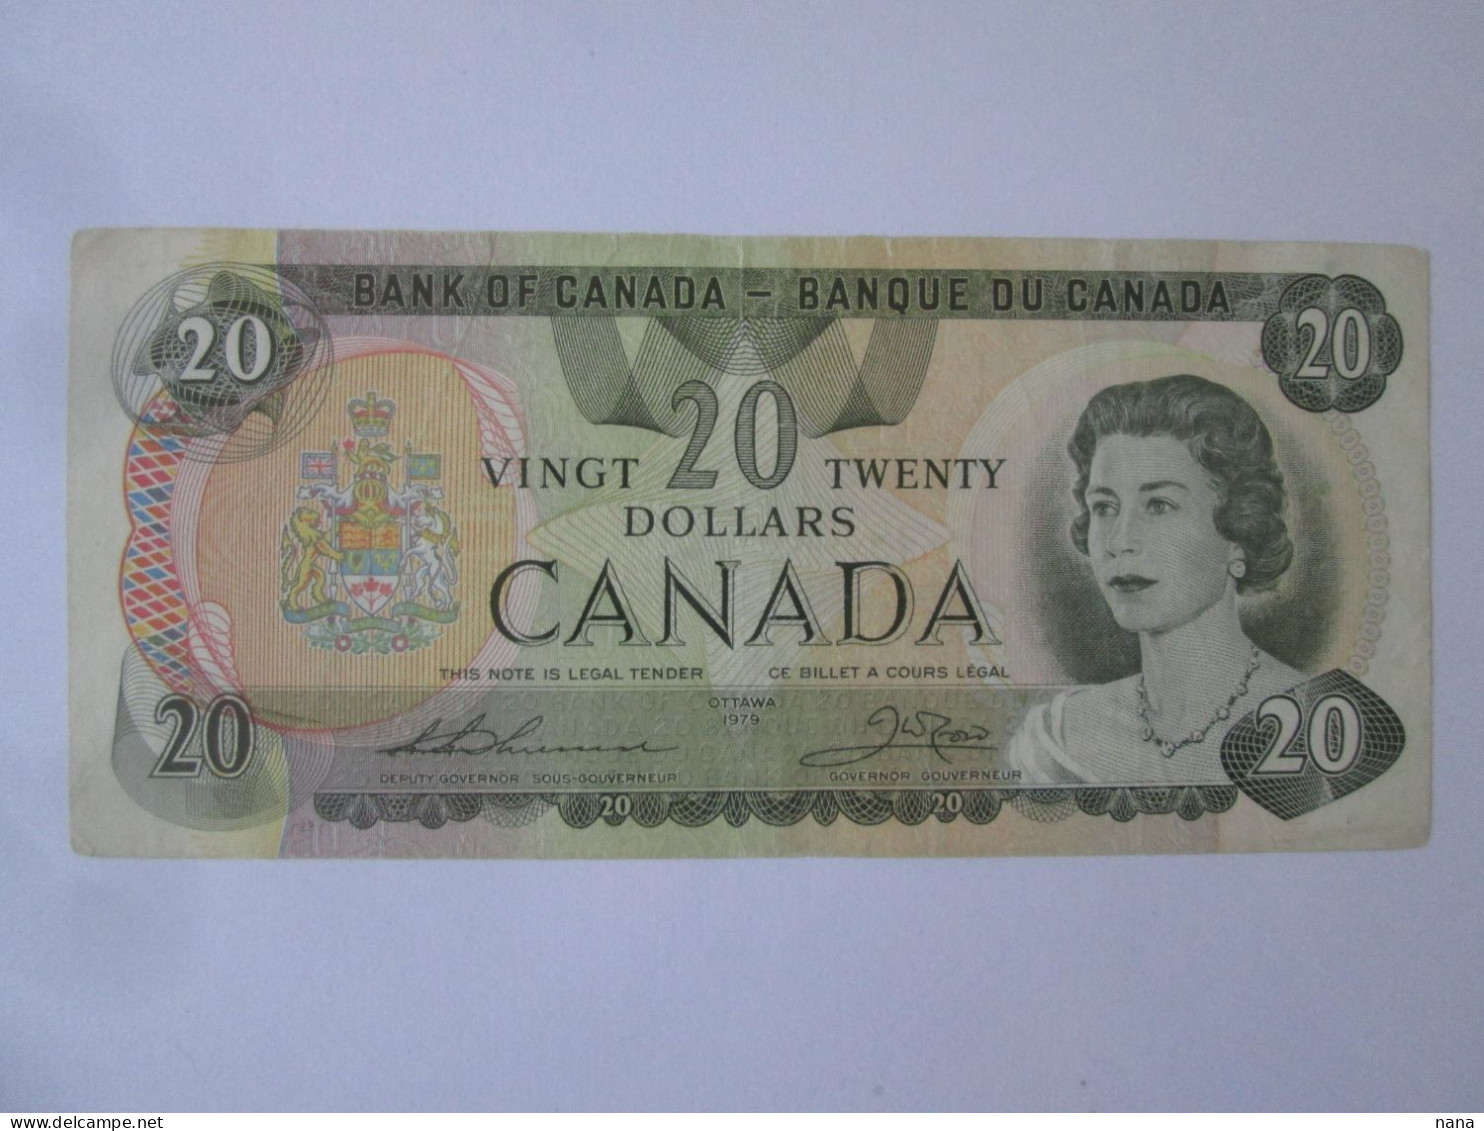 Canada 20 Dollars 1979 Banknote,see Pictures - Canada